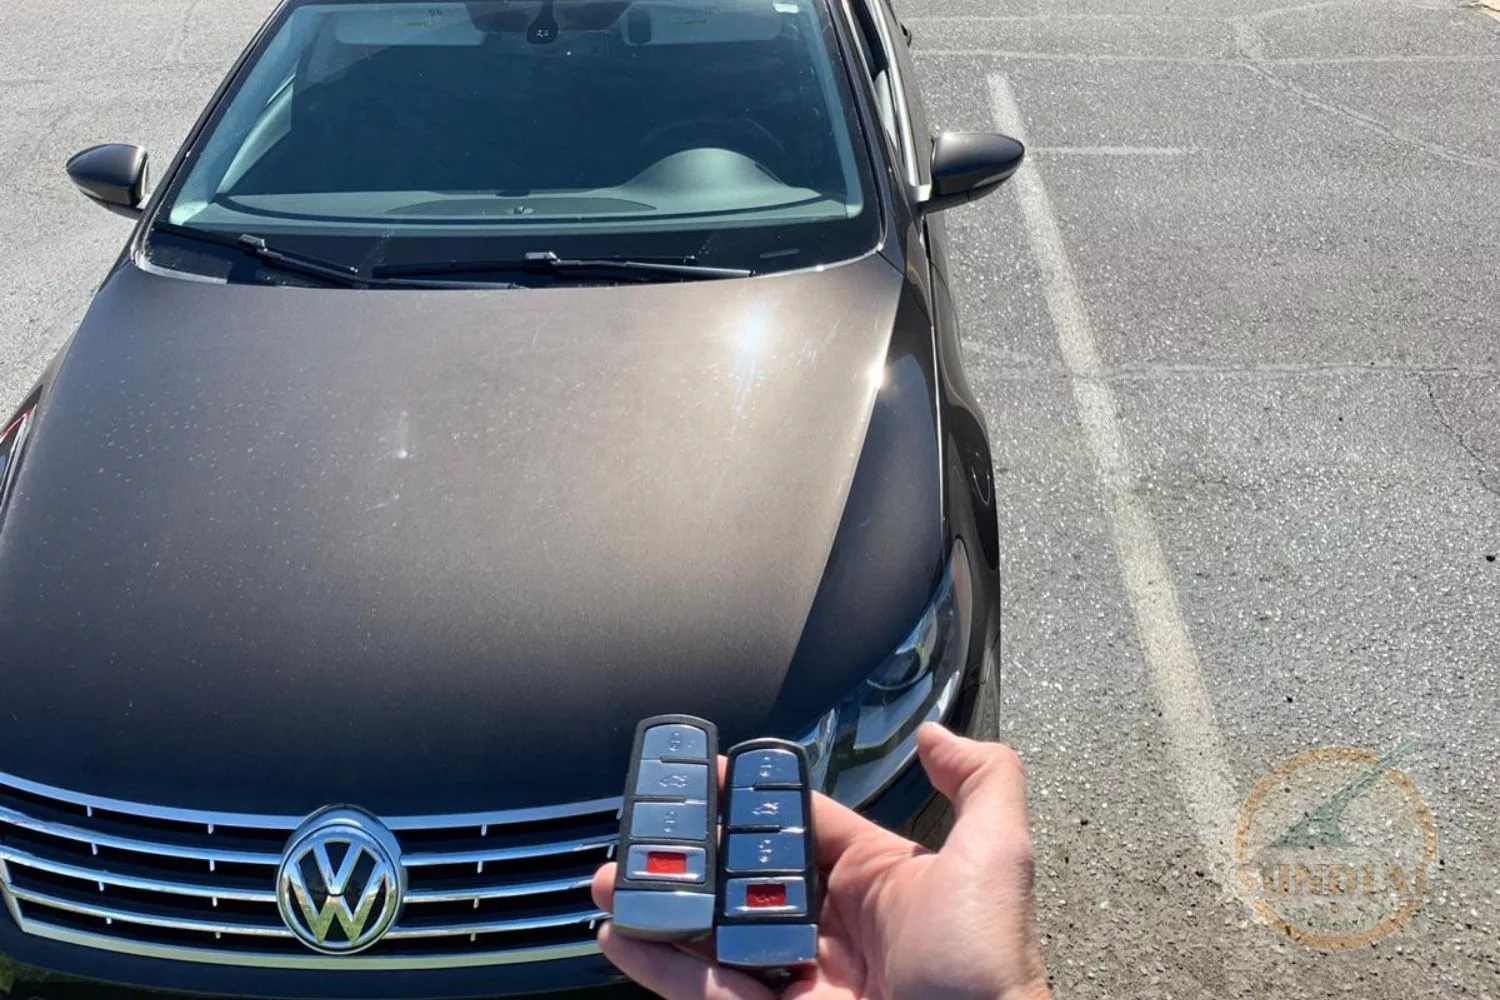 A person's hand holding two Volkswagen car keys in front of a parked Volkswagen car, with 'GROOMING' and 'LOCKSMITH' store signs in the background.